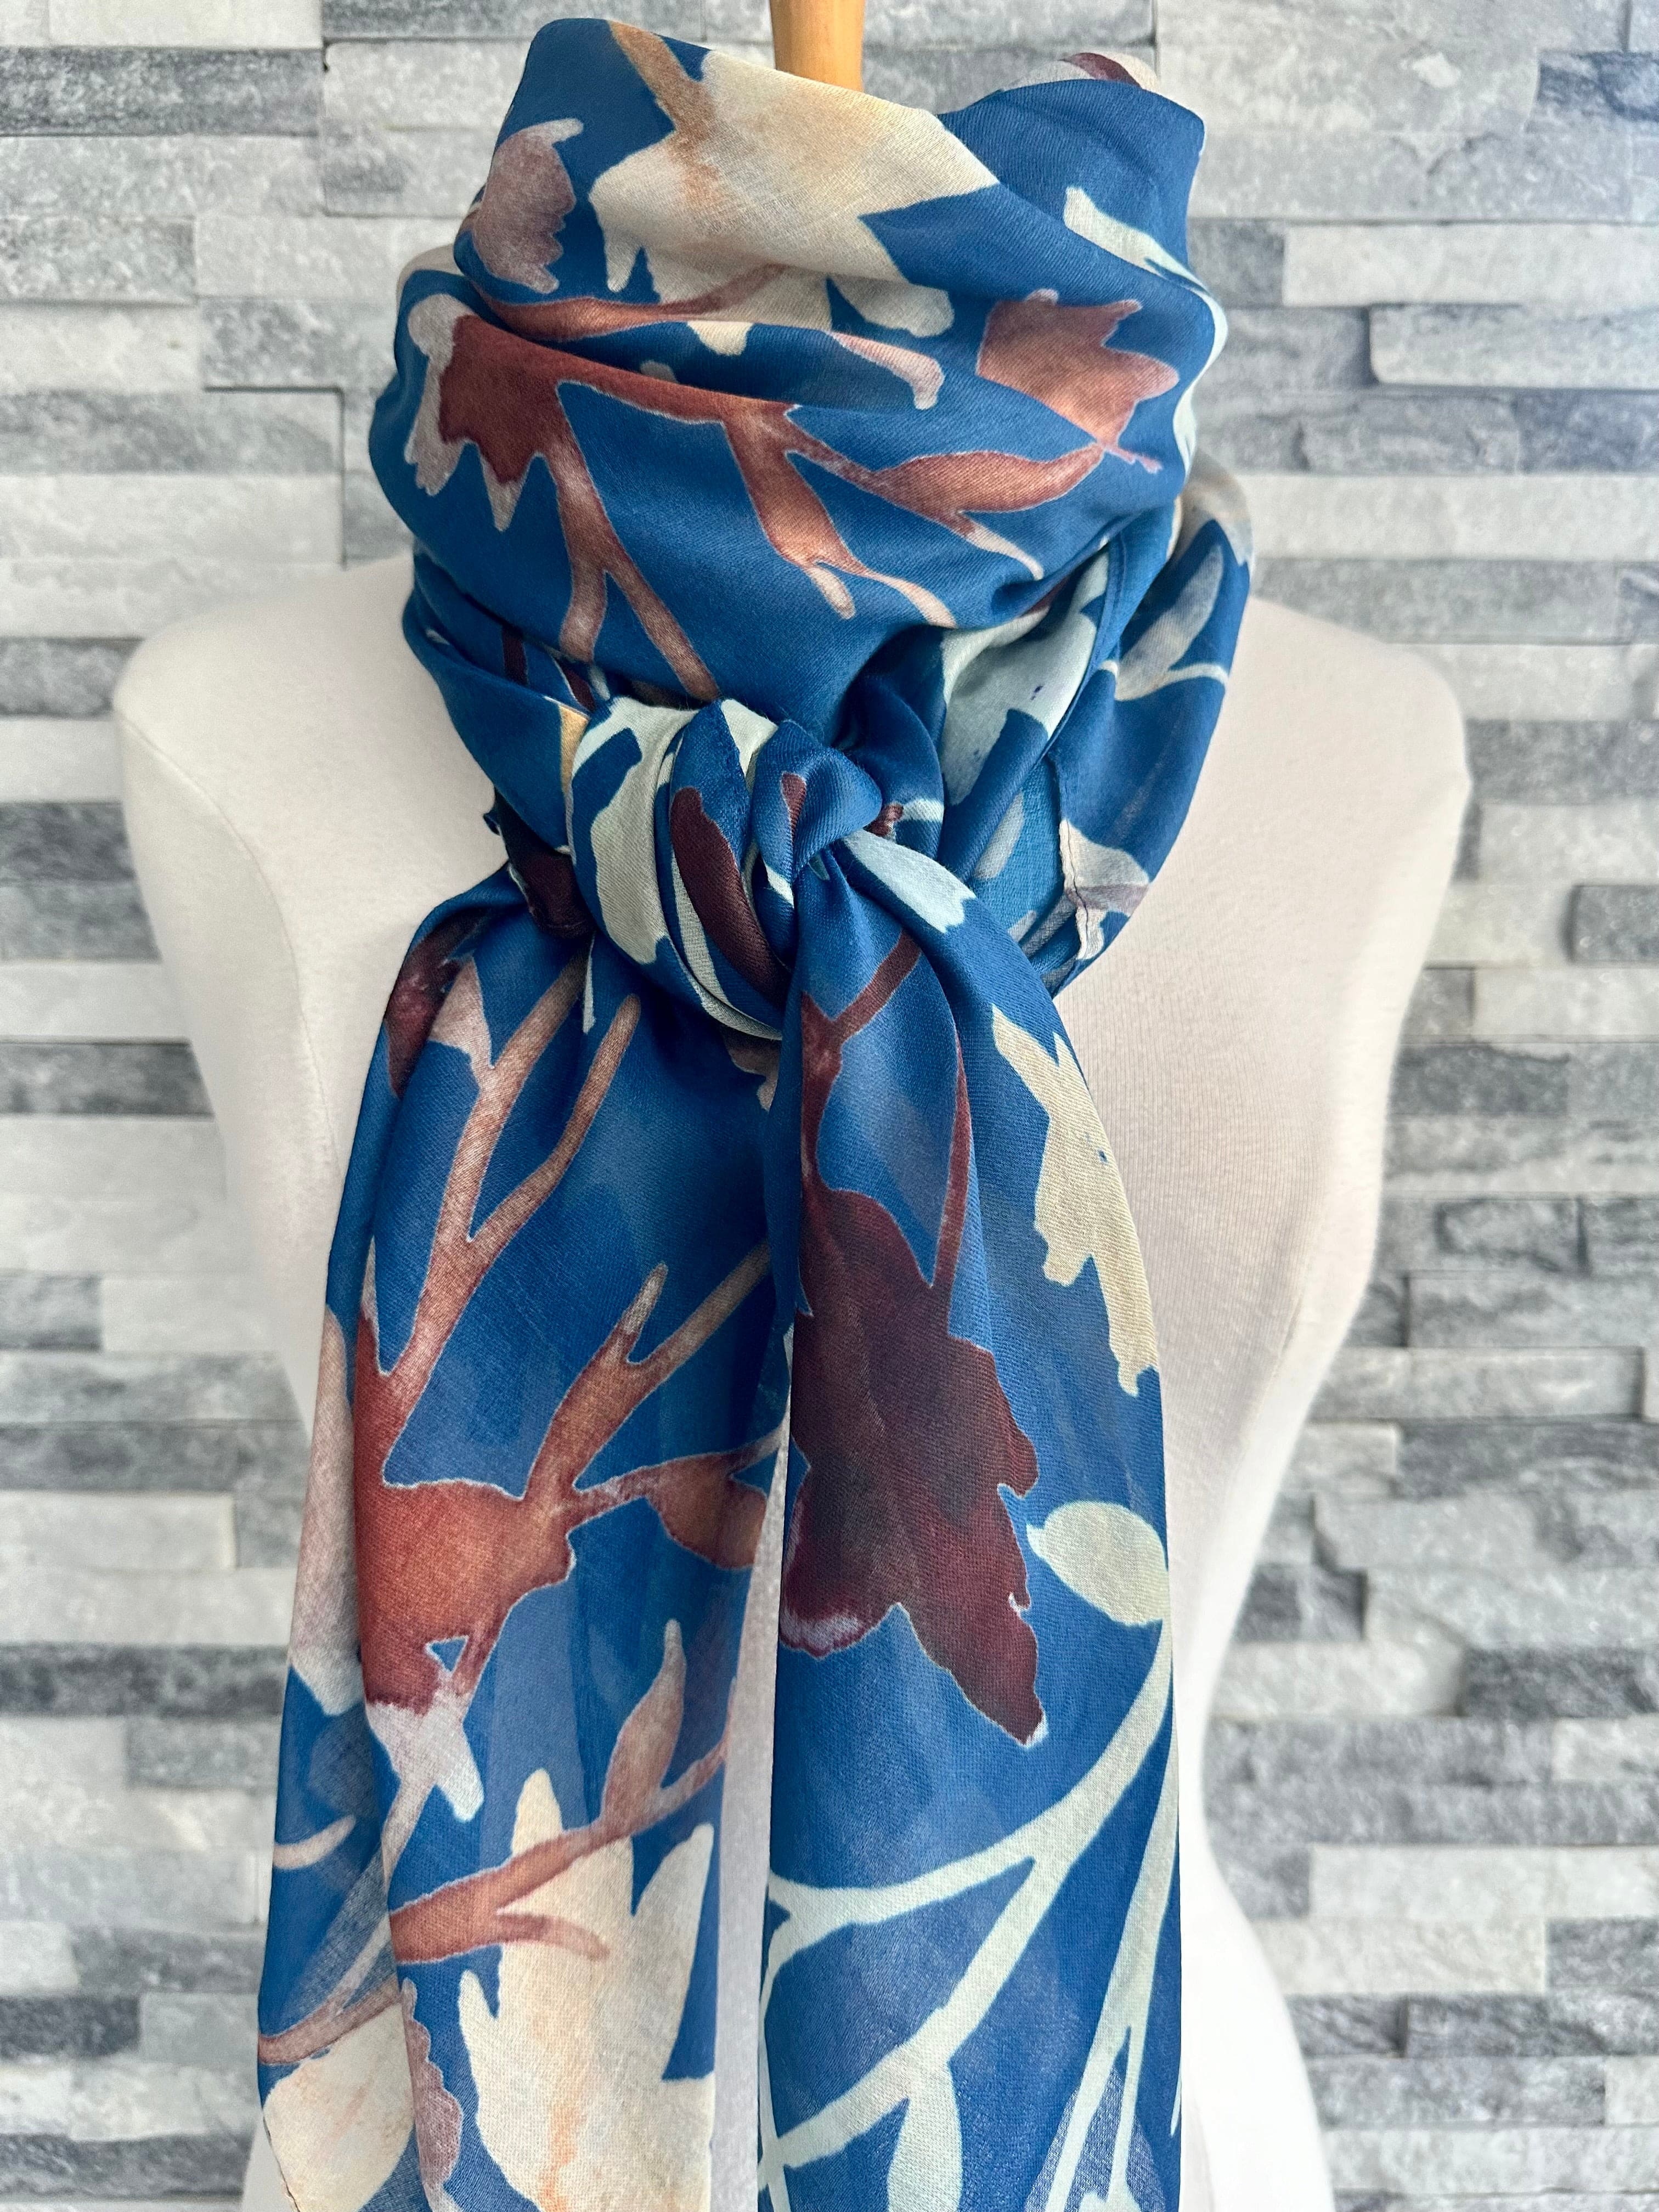 lusciousscarves Ladies Water coloured Floral Silhouettes Scarf, Blue and Maroon.